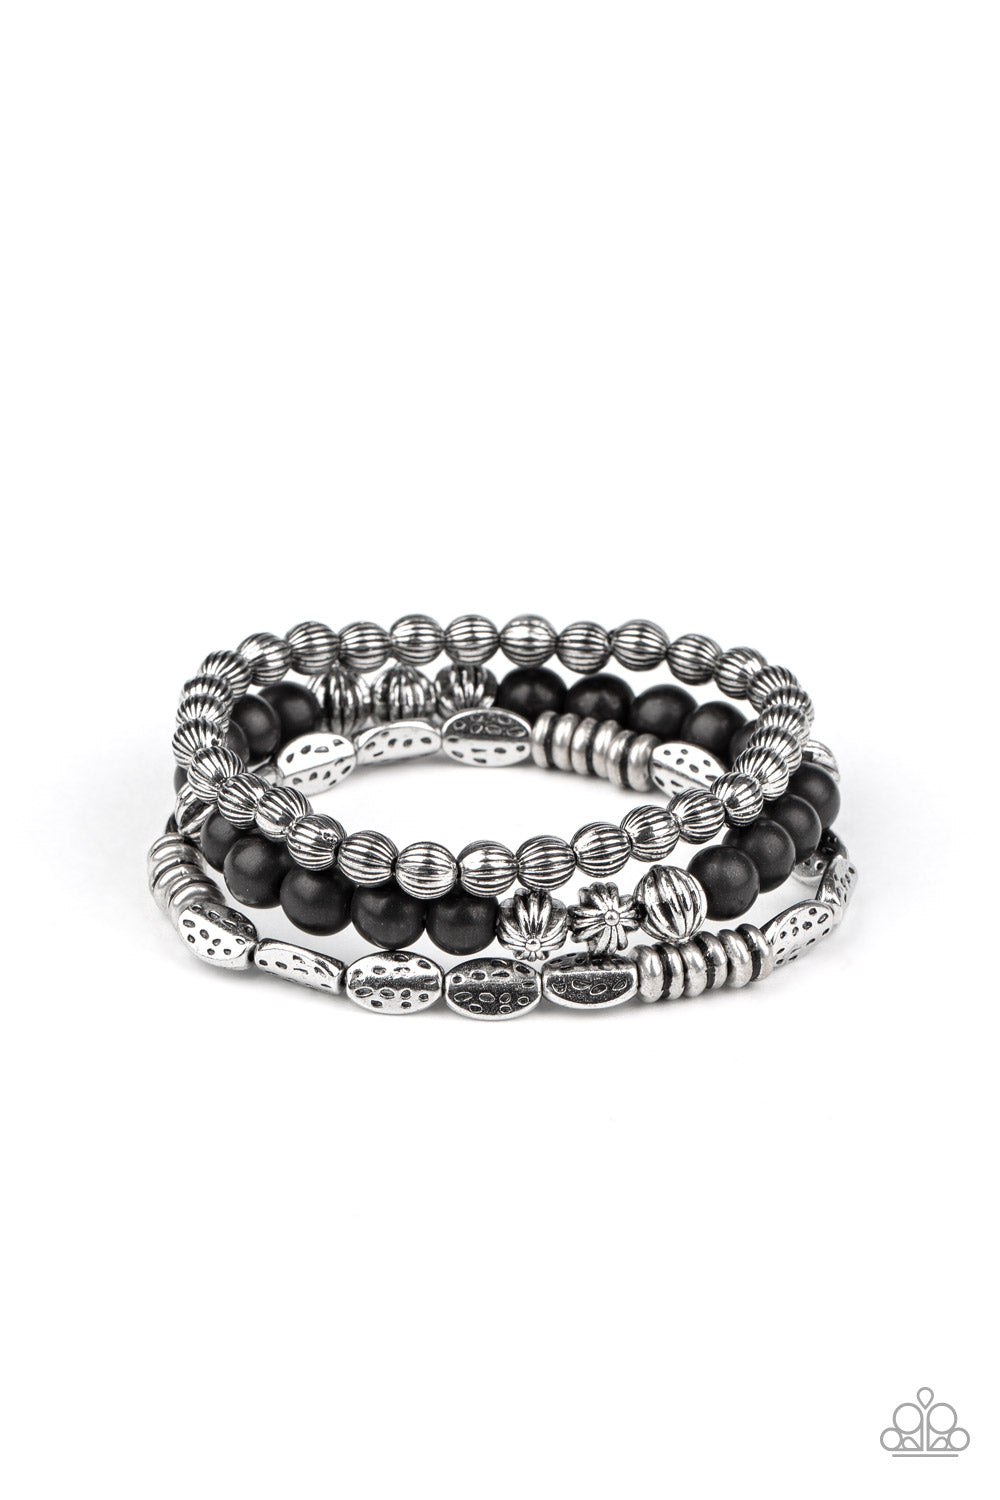 &lt;P&gt;An earthy collision of black stones, ornate silver beads and hammered silver accents are threaded along stretchy bands around the wrist, creating colorful layers.
  &lt;/P&gt;

&lt;P&gt;&lt;I&gt; Sold as one set of three bracelets.&lt;/I&gt;&lt;/p&gt;


&lt;img src=\&quot;https://d9b54x484lq62.cloudfront.net/paparazzi/shopping/images/517_tag150x115_1.png\&quot; alt=\&quot;New Kit\&quot; align=\&quot;middle\&quot; height=\&quot;50\&quot; width=\&quot;50\&quot;/&gt;